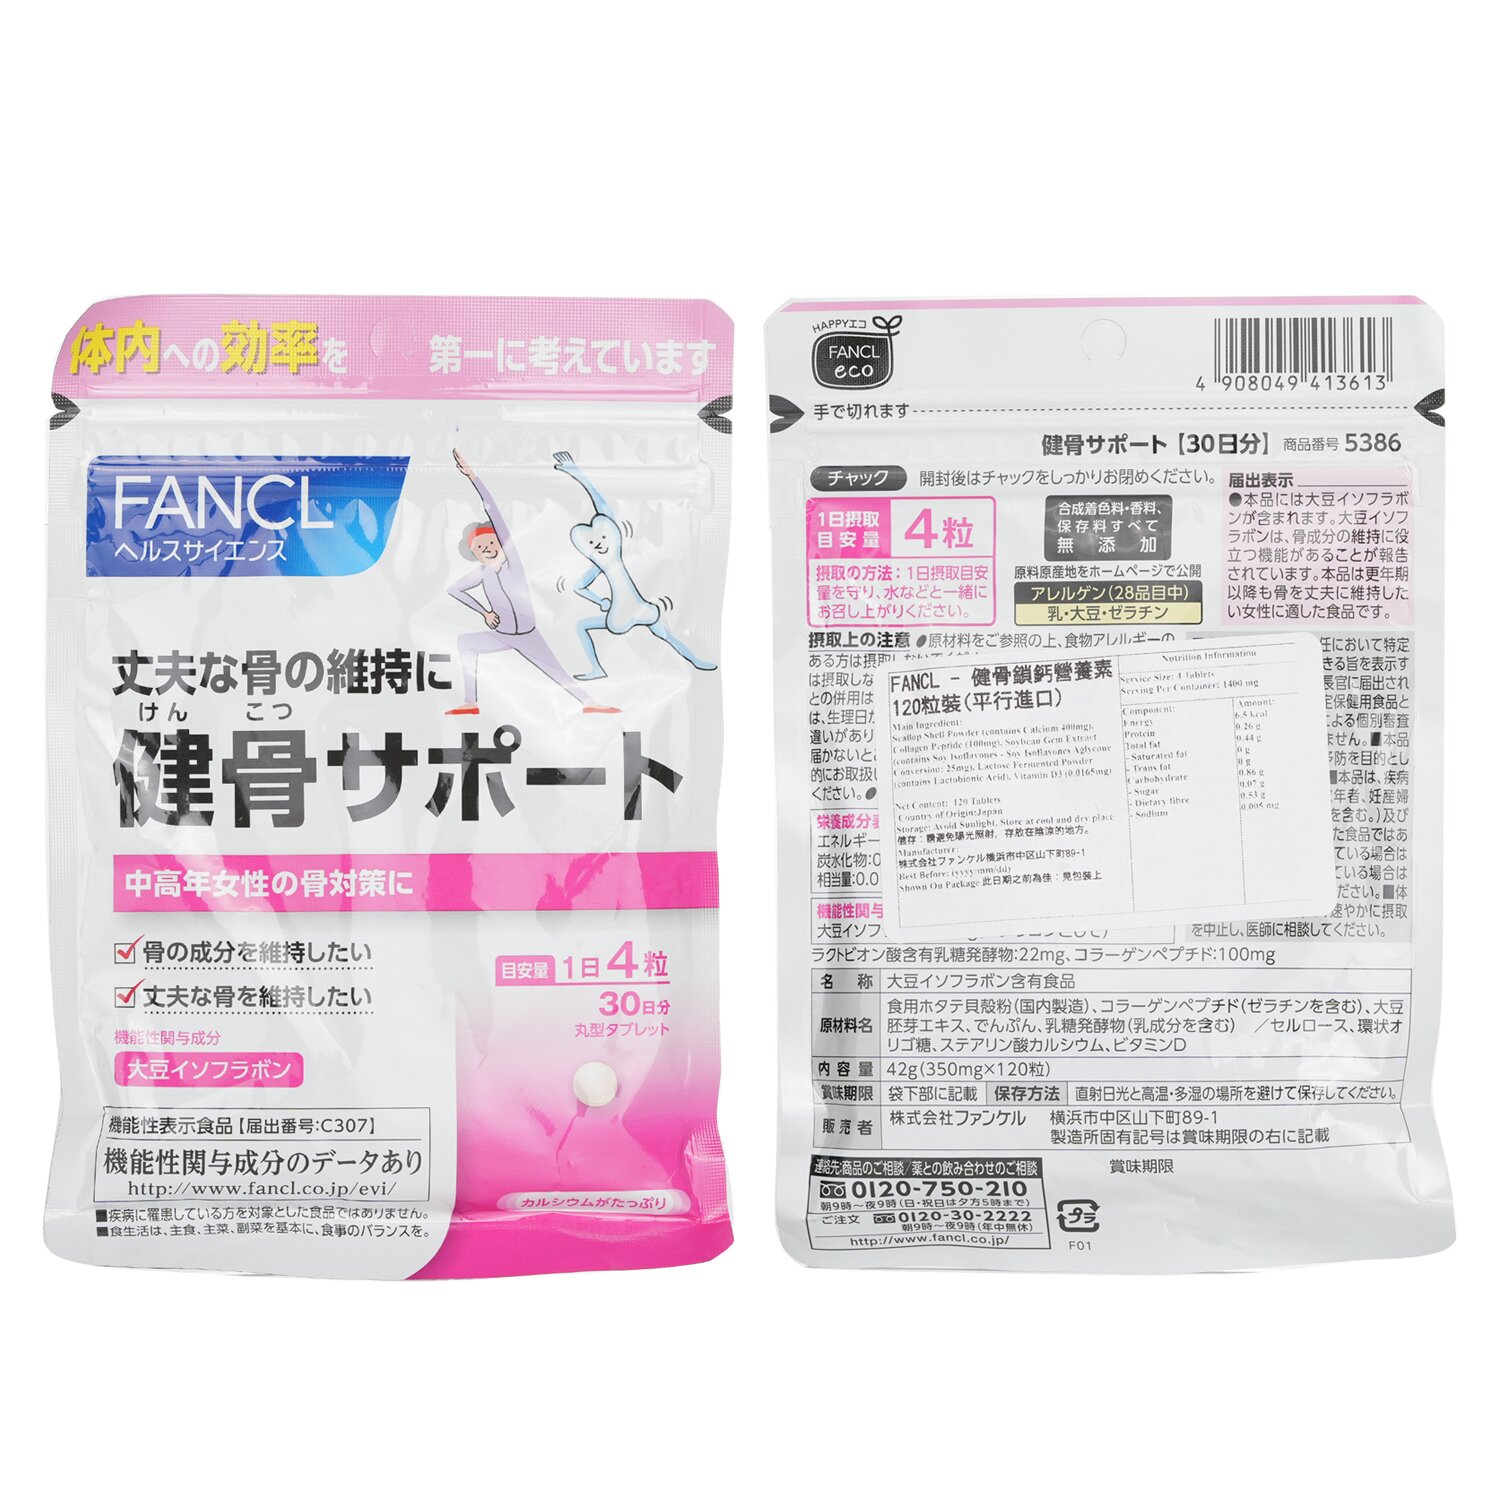 Fancl Healthy Bone Nutrition 120 Tablets In 30 Days [Parallel Import Good] 120 tablets